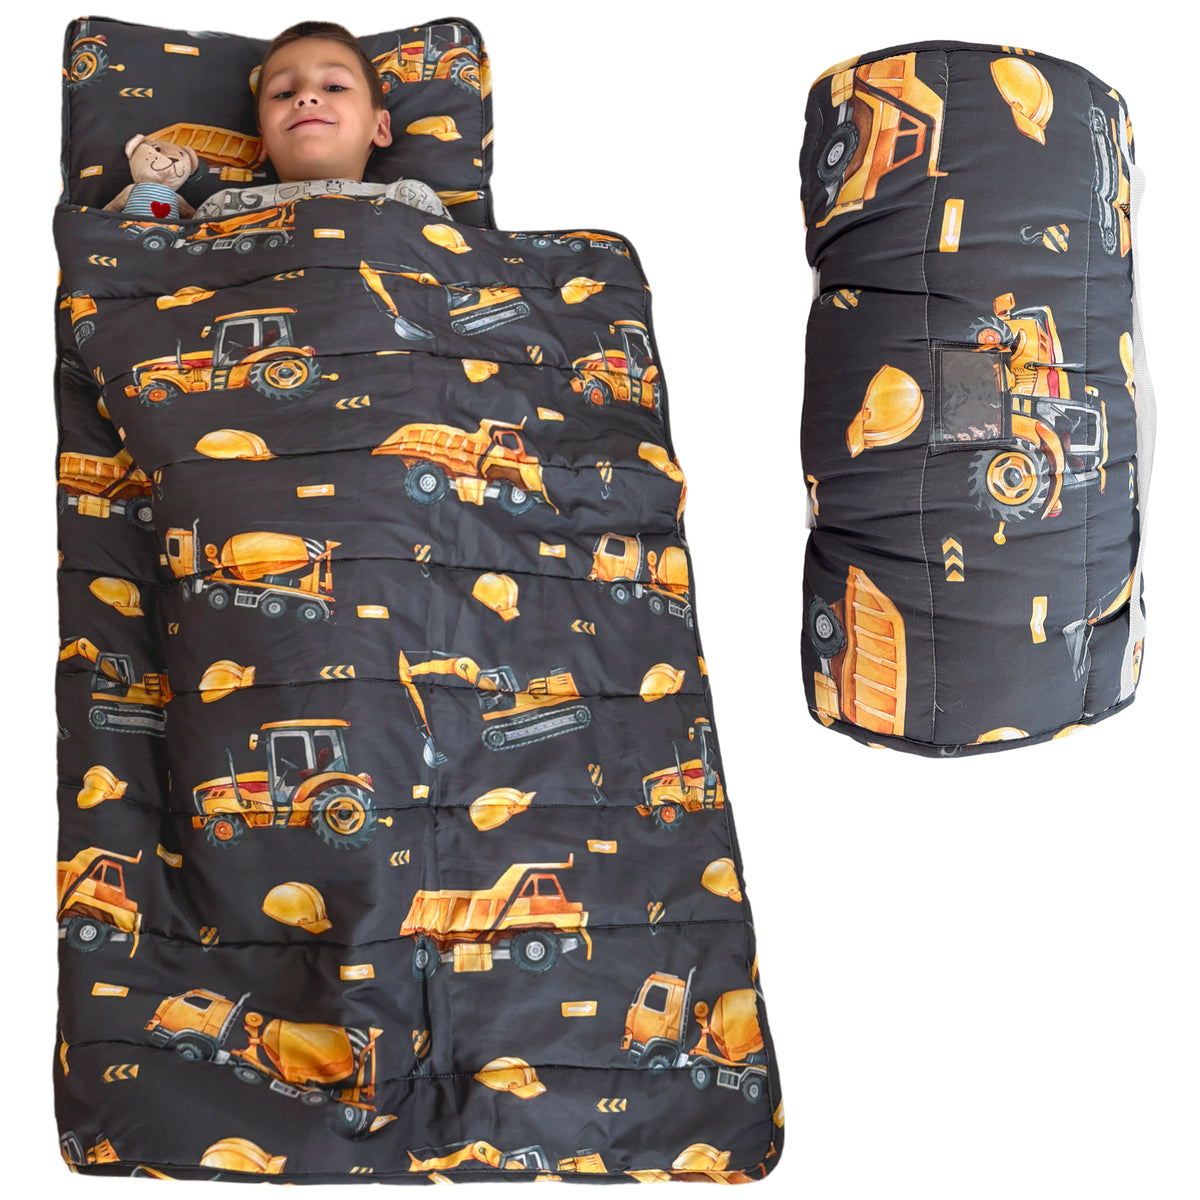 Toddler Nap Mat with Removable Pillow, Wide Blanket | 55" х 21" | Age 3-7 | Construction